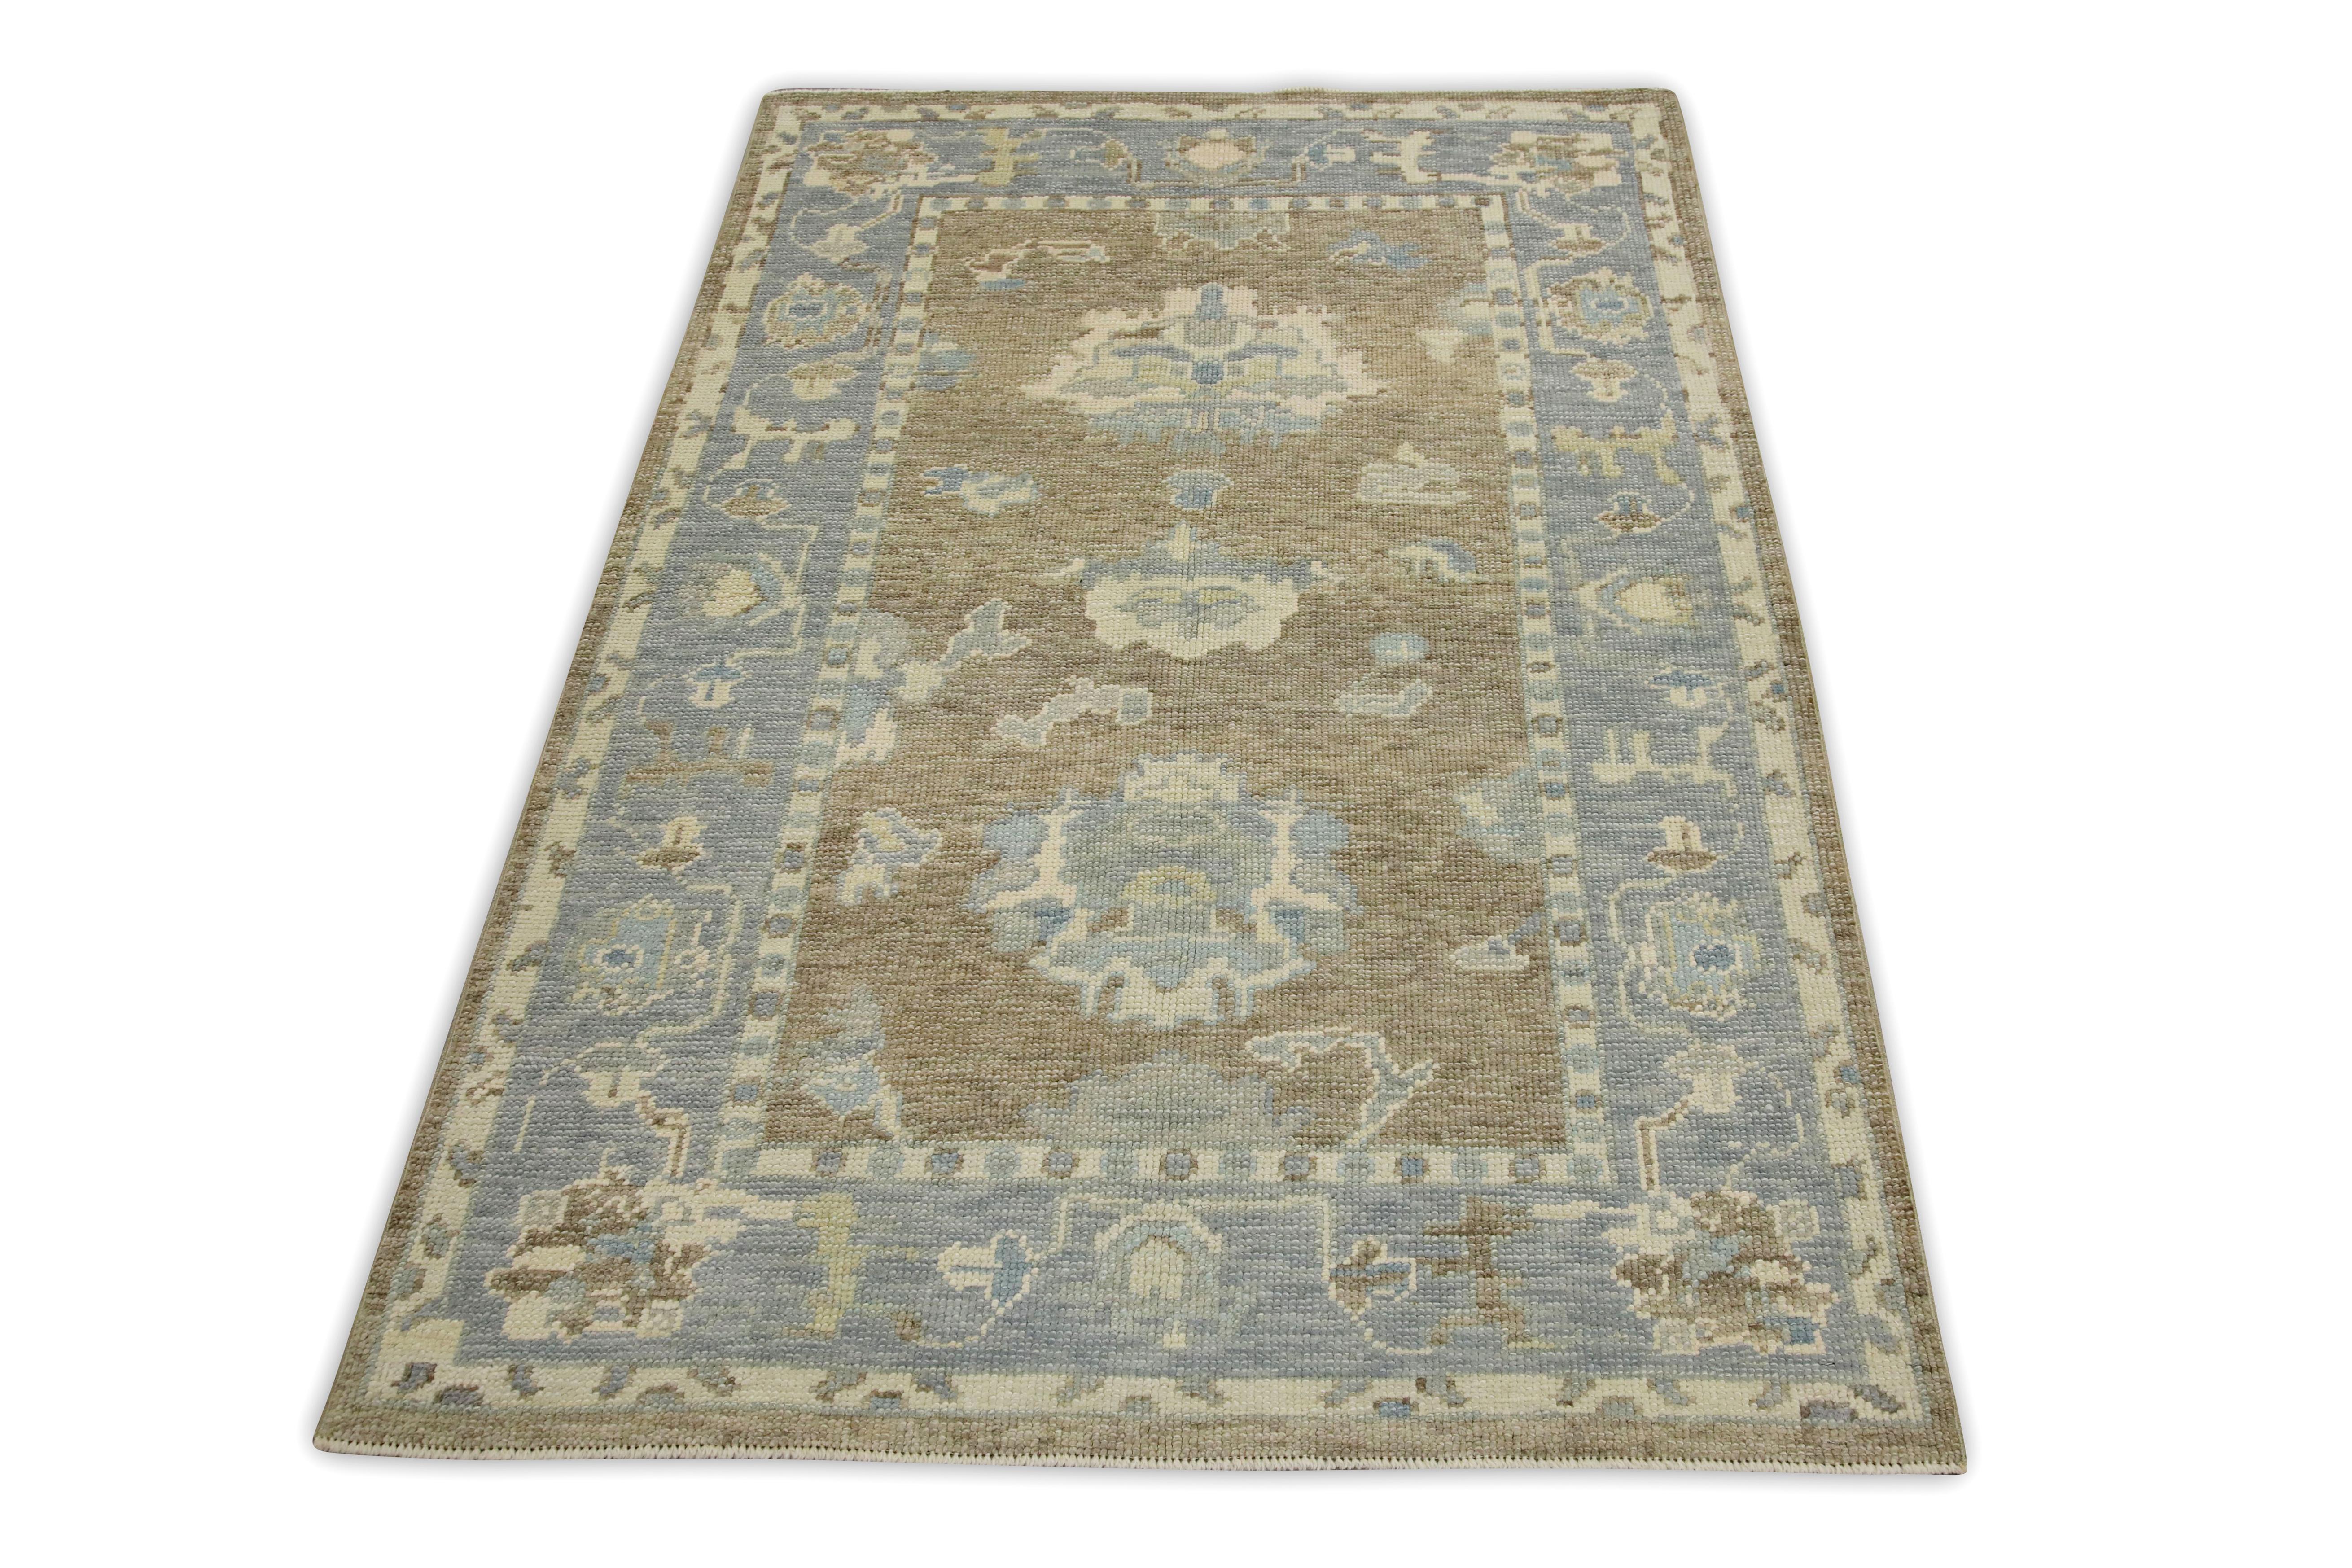 Contemporary Blue & Brown Floral Design Handwoven Wool Turkish Oushak Rug 3'8